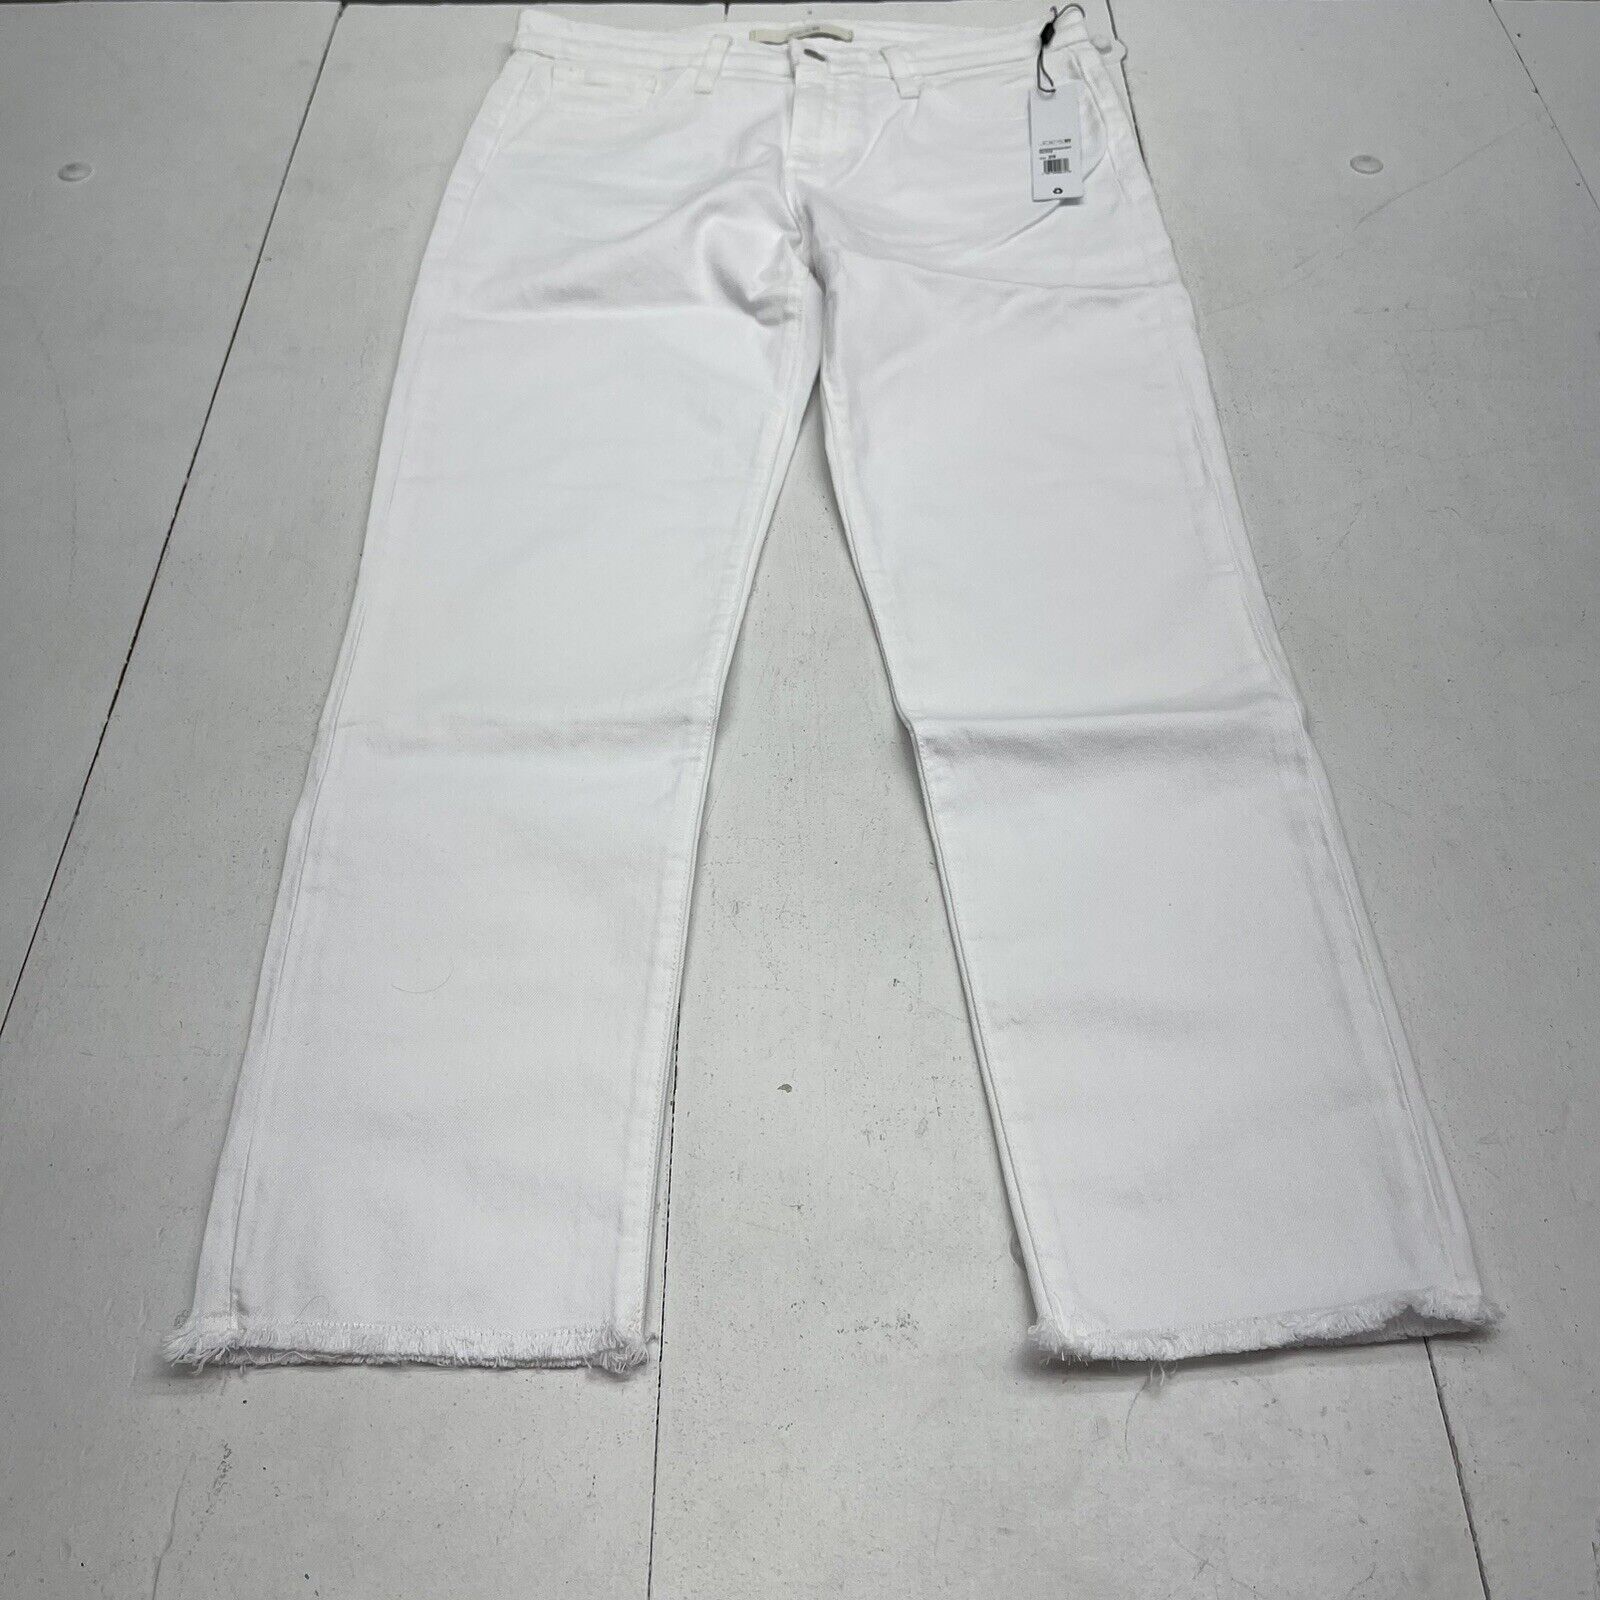 Joes The Lara Mid Rise Cigarette Ankle Jeans White Women’s 29 New